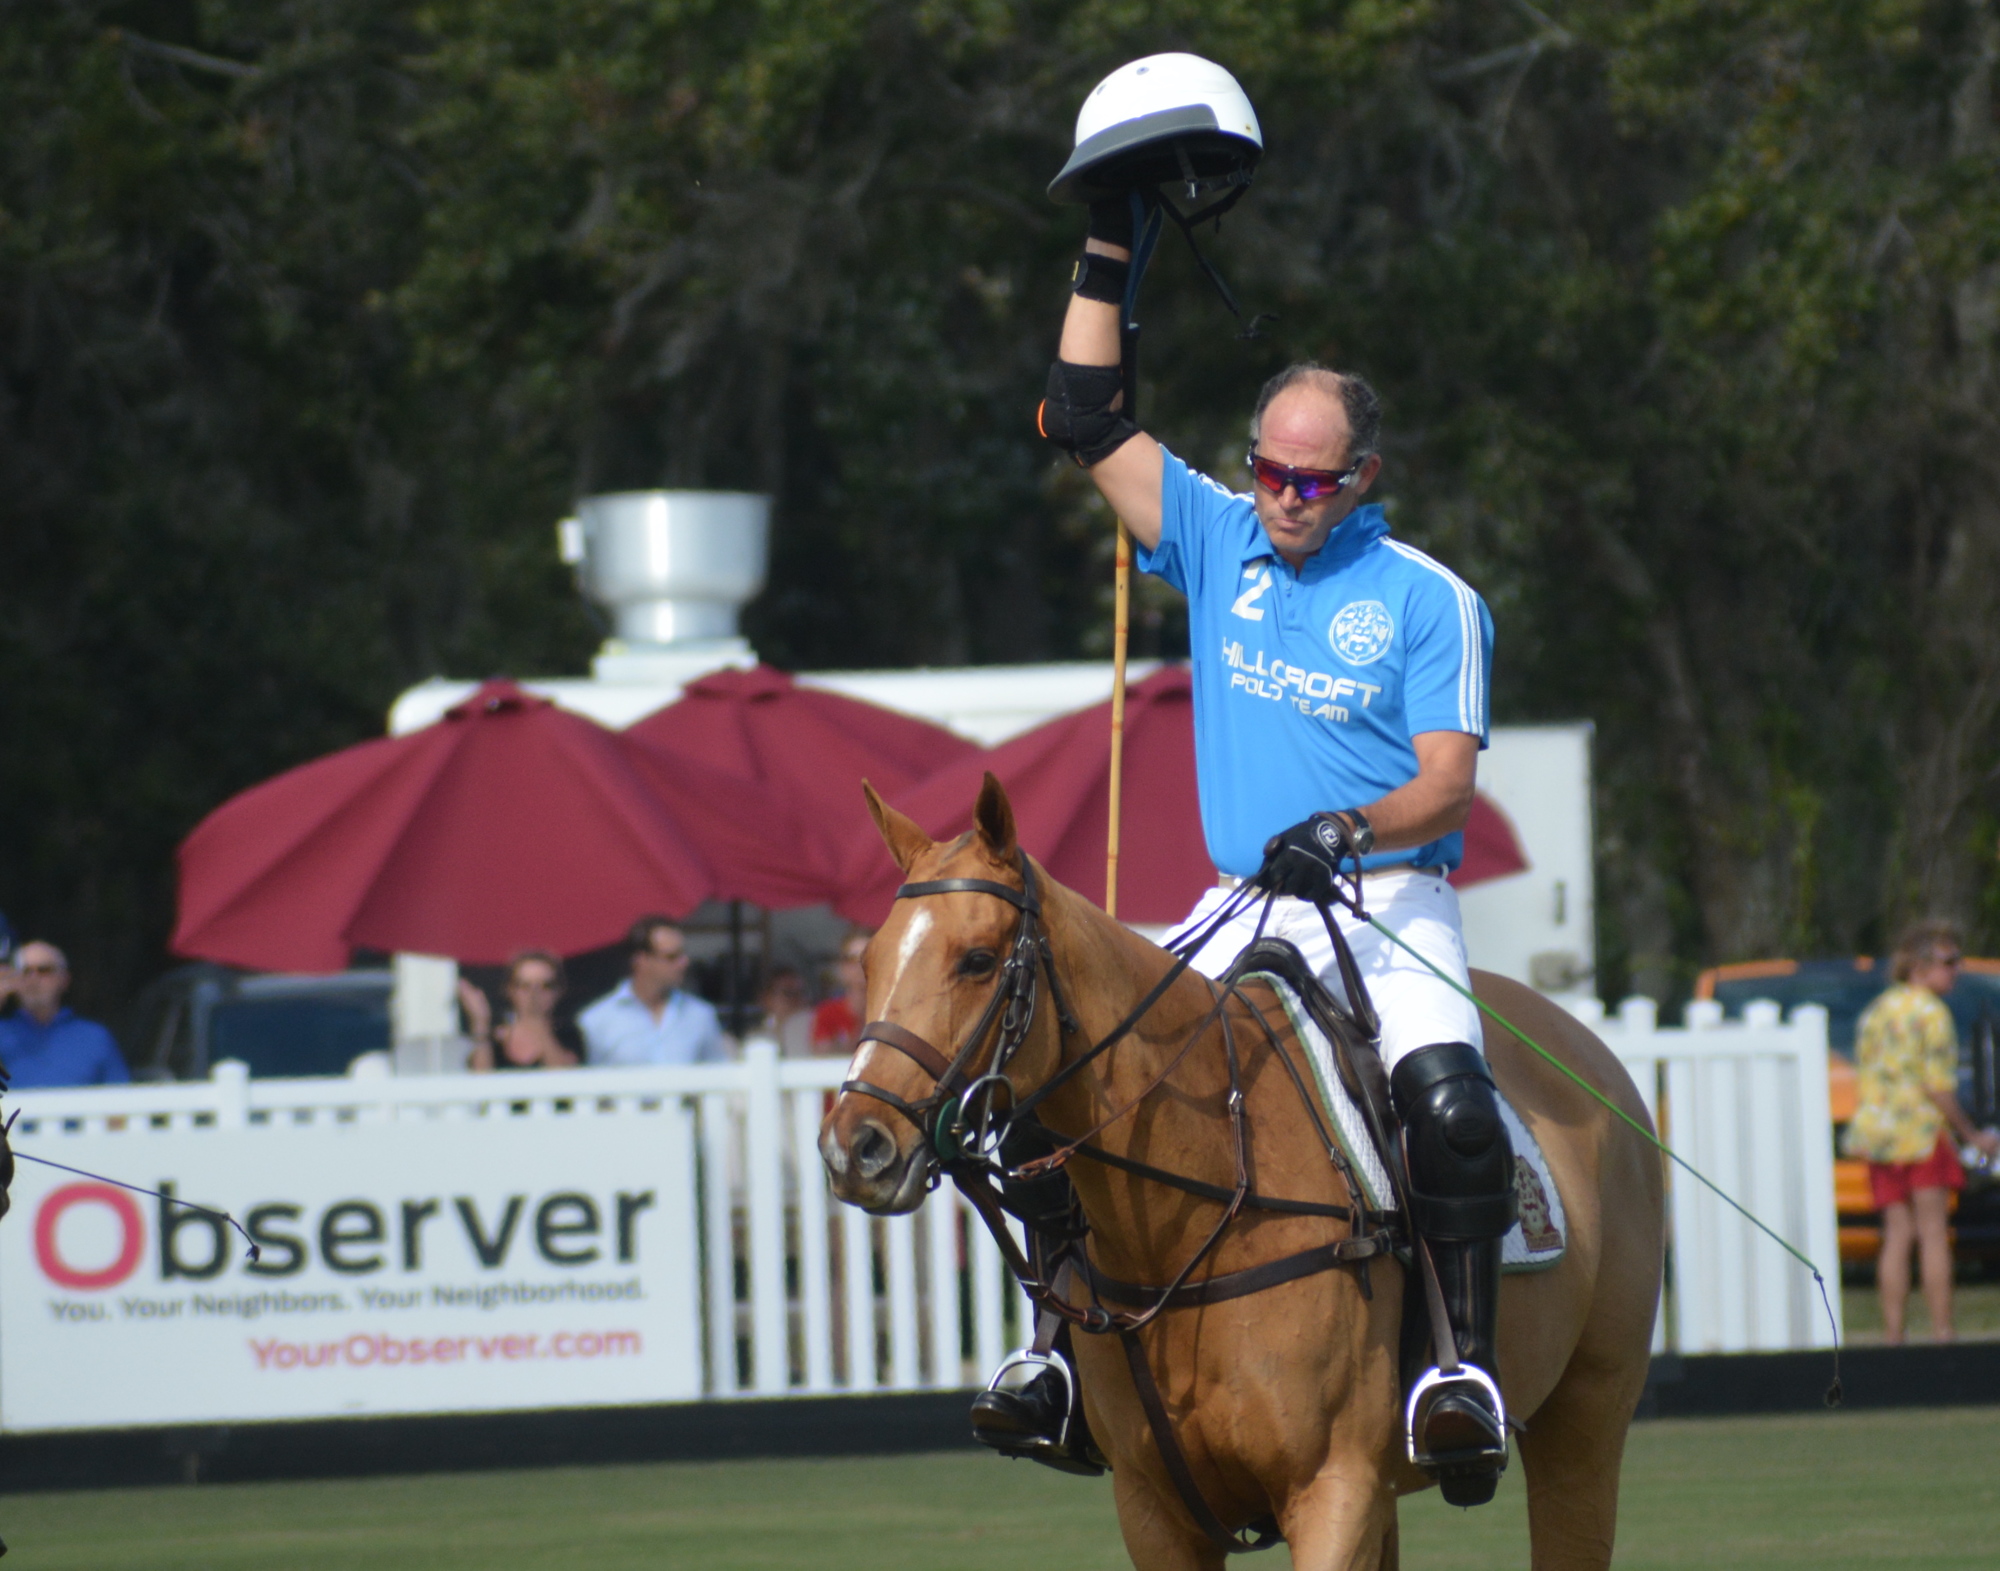 James Miller salutes the crowd on another packed Sunday at the Sarasota Polo Club.